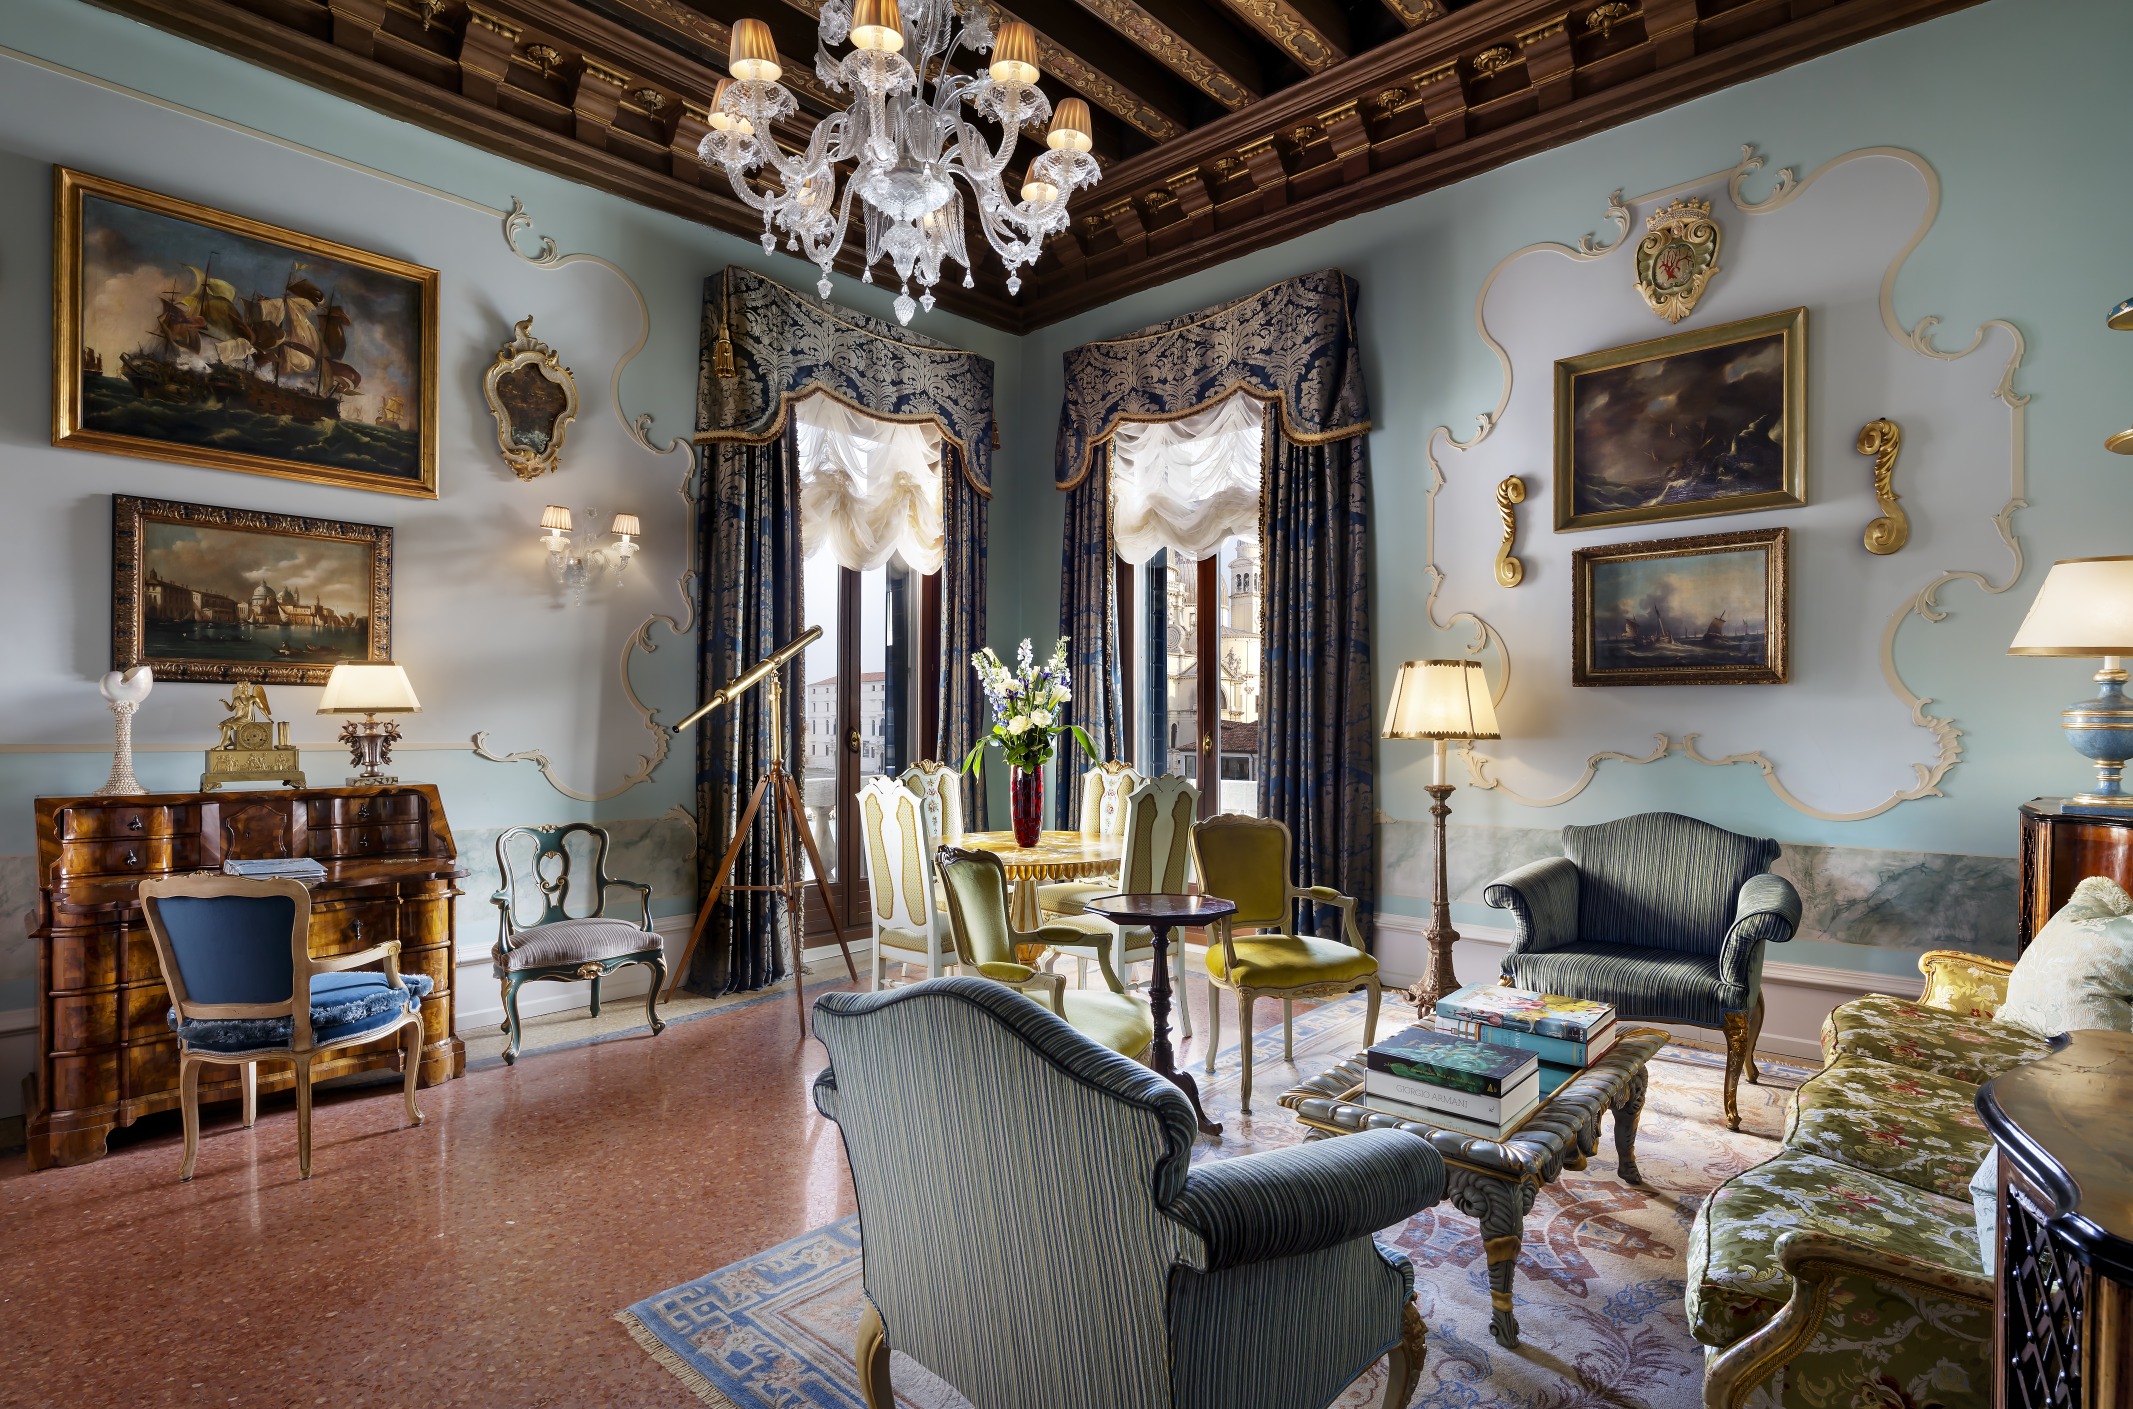 https://theauctioncollective.com/media/4560/the-gritti-palace-2.jpg